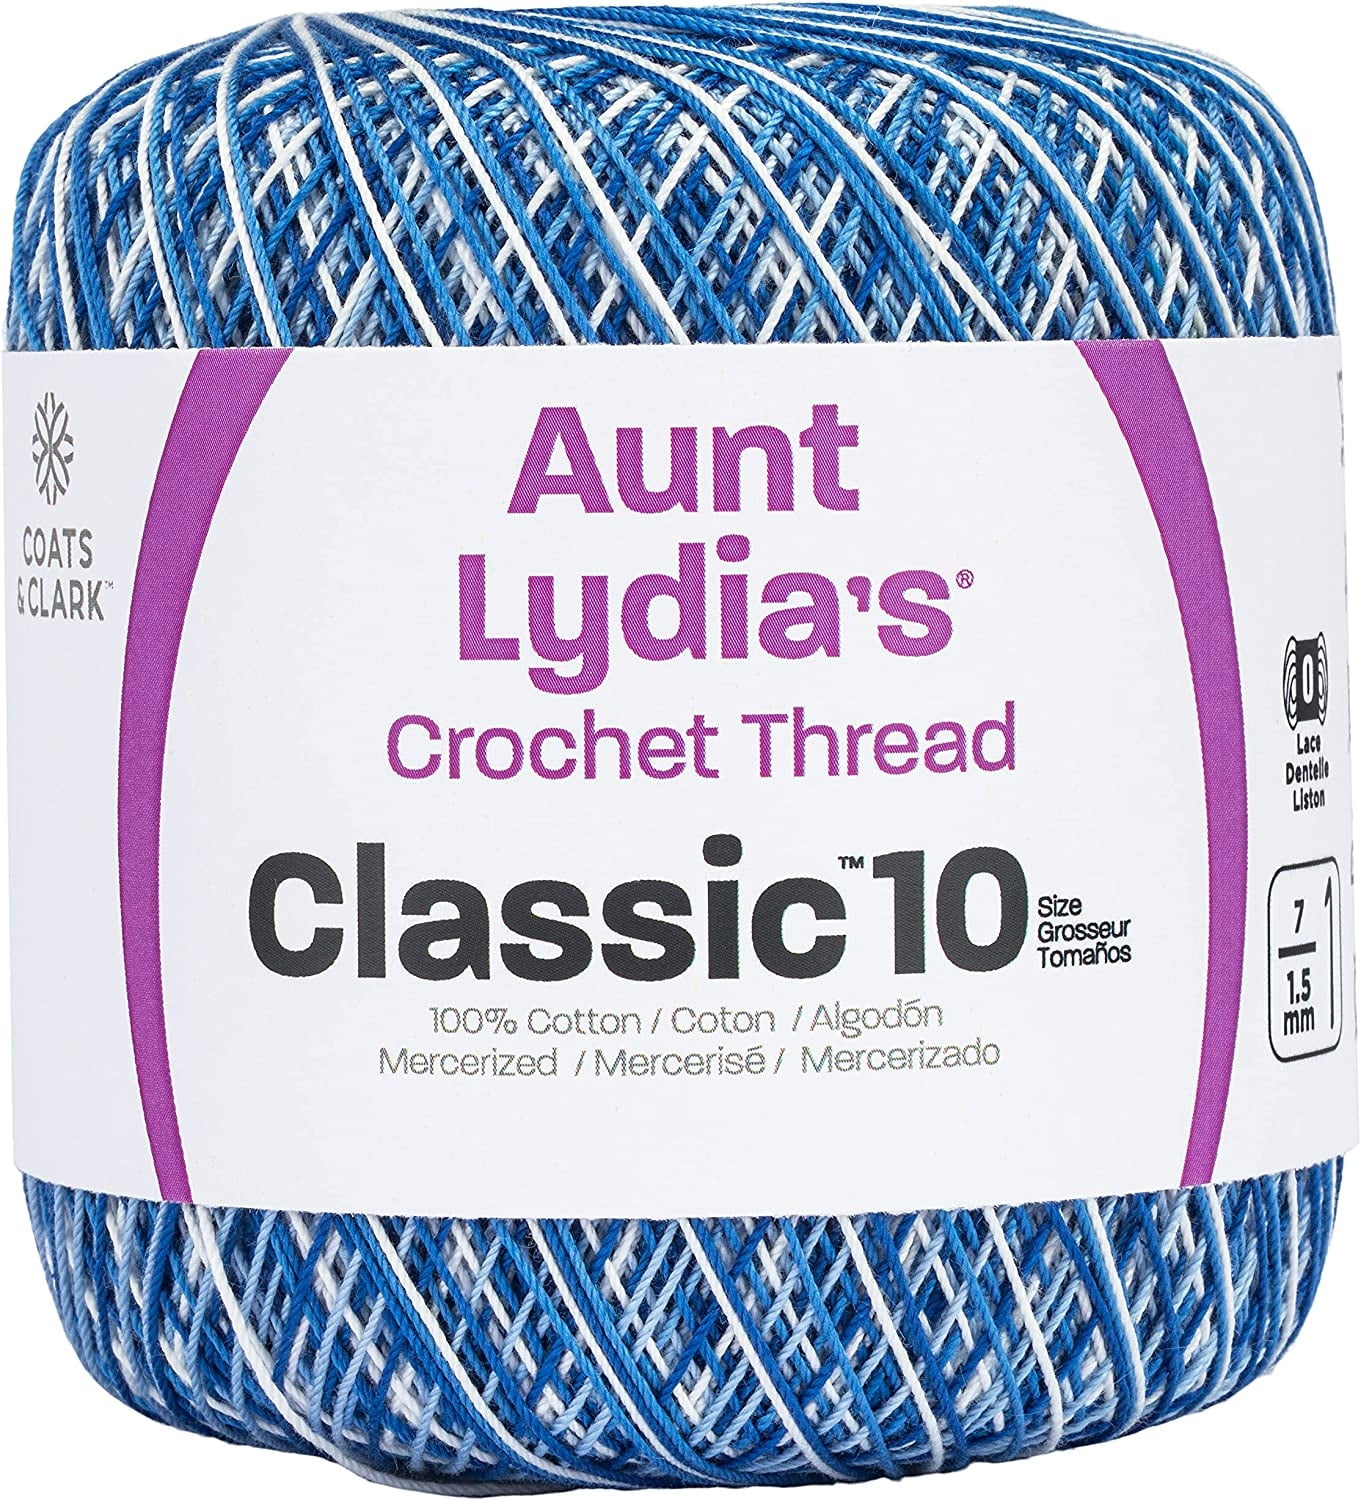 Aunt Lydia's Crochet Thread Classic 10 In Cardinal Red, 2 Pack